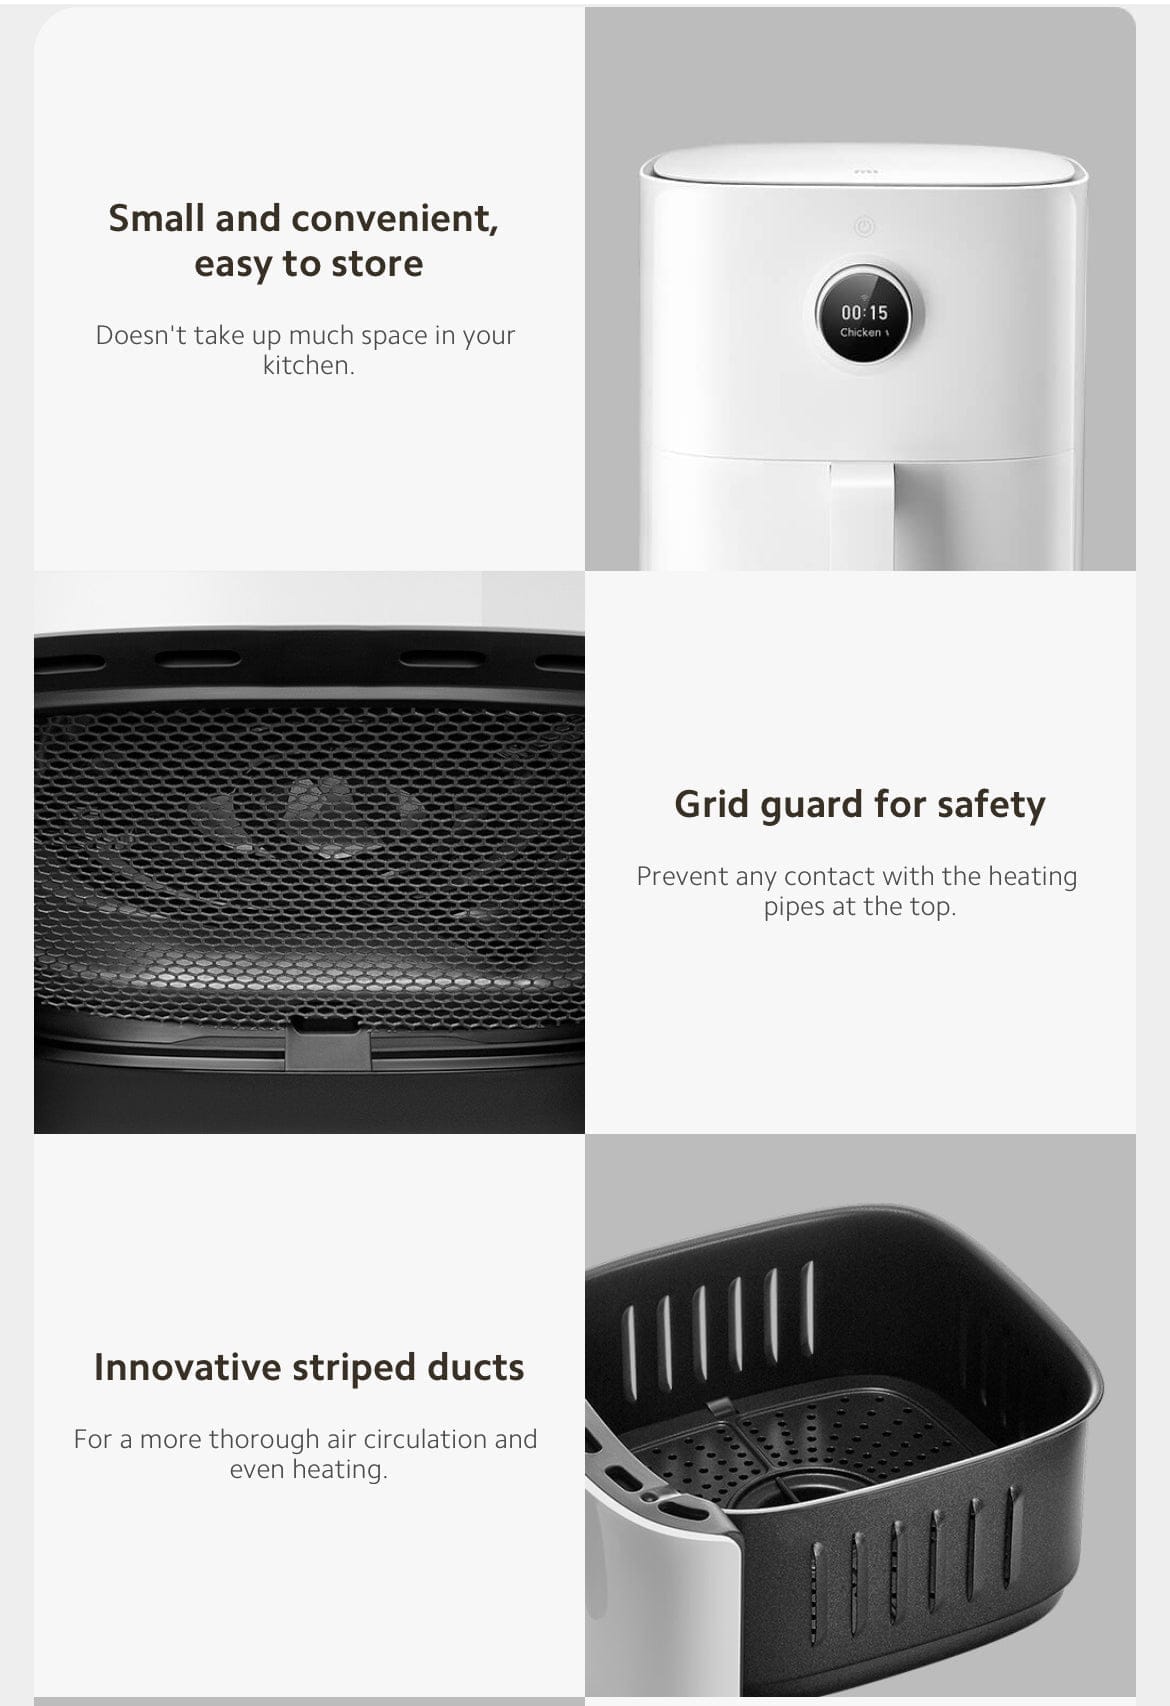 Xiaomi's Mi Smart Air Fryer 3.5L can be controlled remotely and it